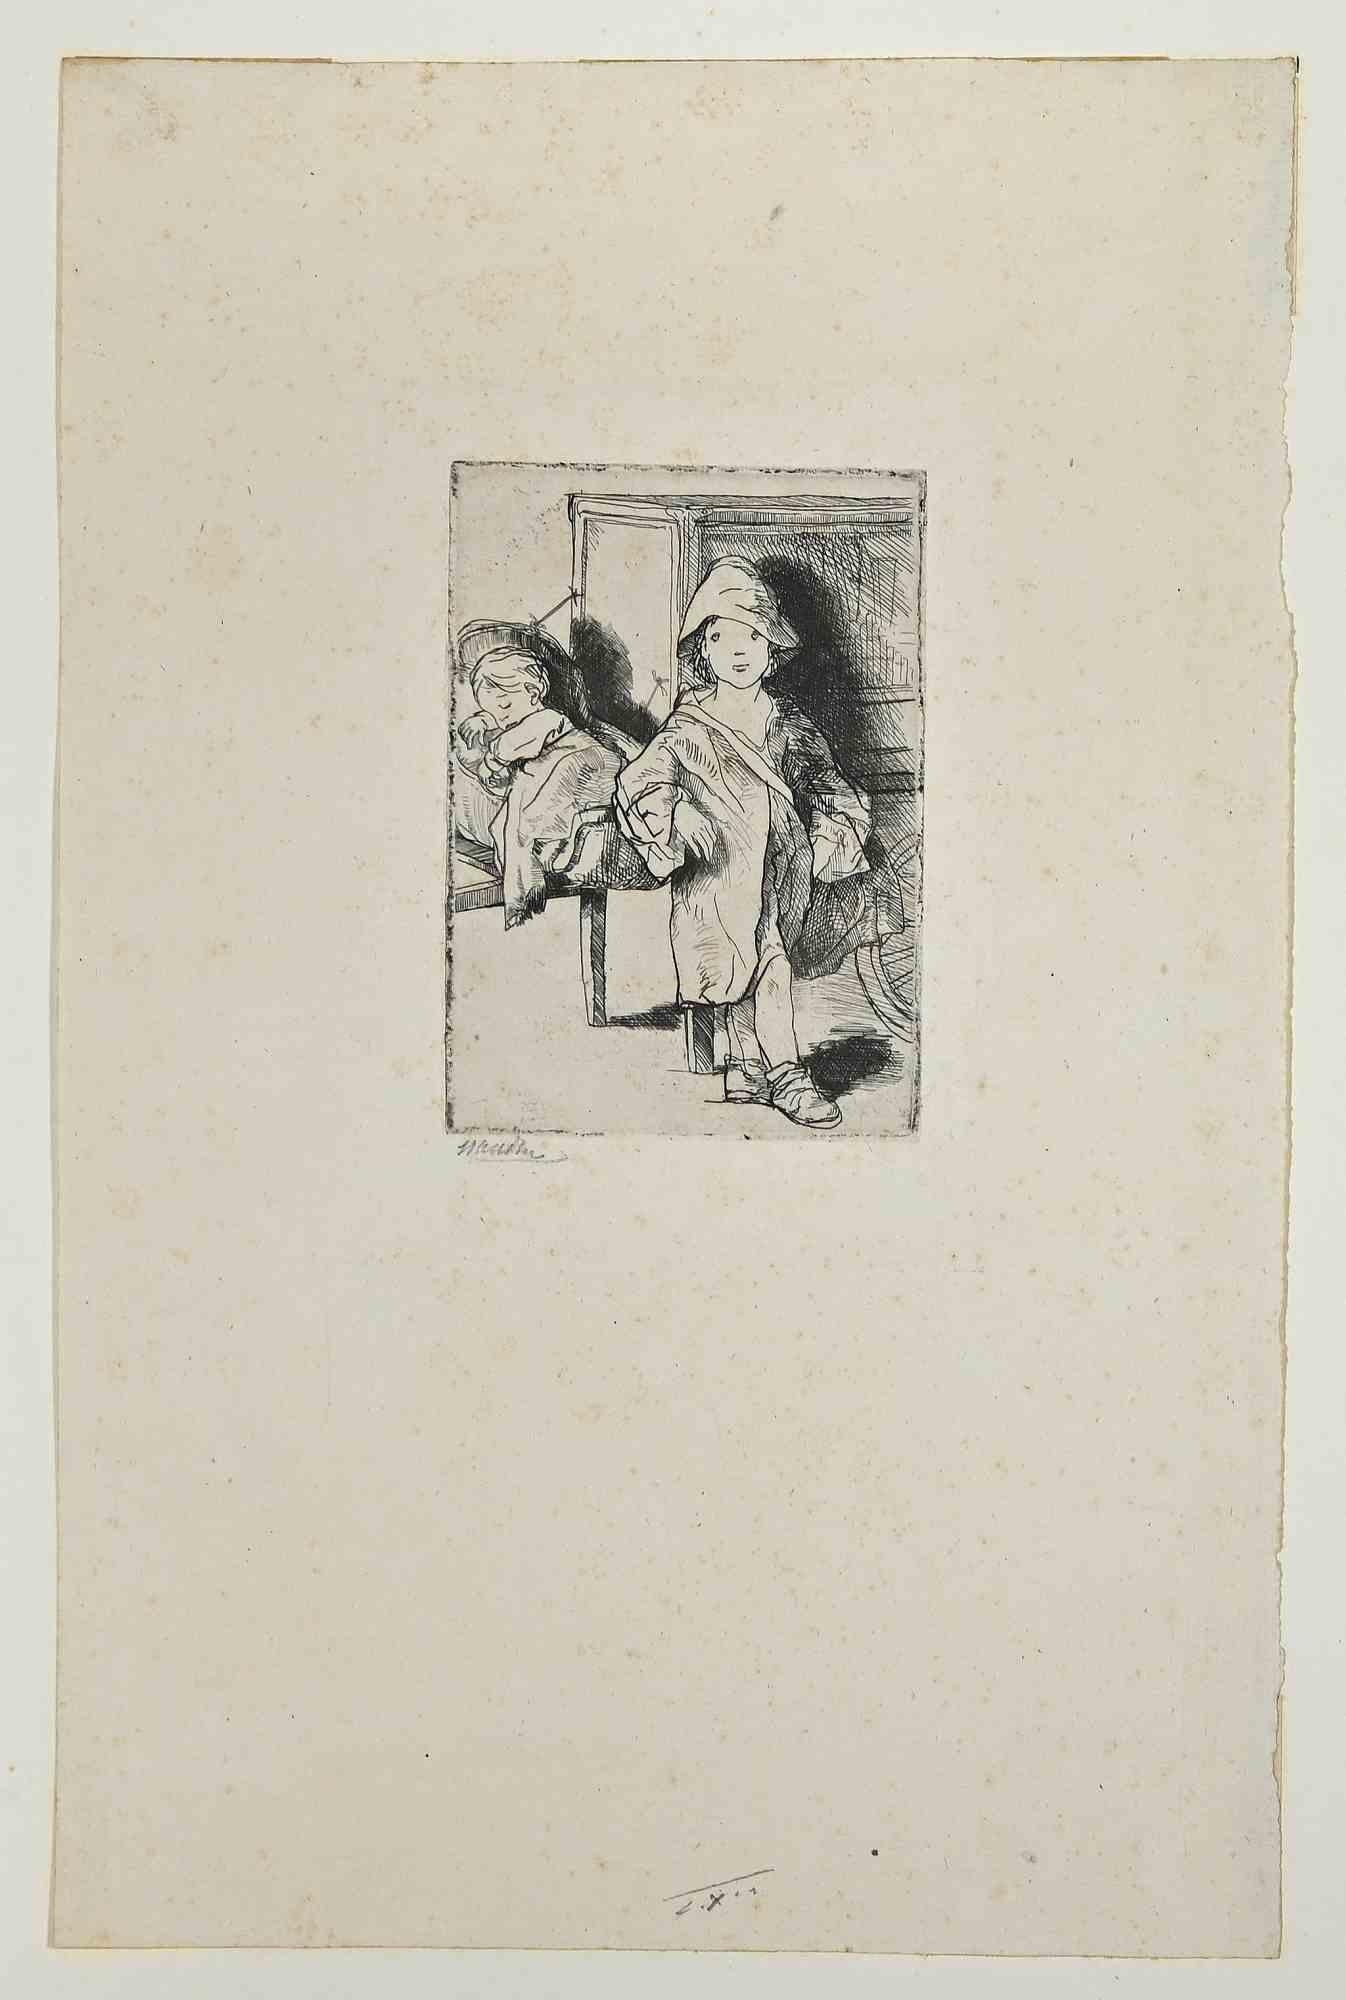 Children is an Original Etching realized by Bernard Naudin (1876-1946).

The artwork  is in good condition, included a cream colored cardboard passpartout (50x32.4 cm).

Hand-signed with pencil by the artist on the lower left corner.

Bernard